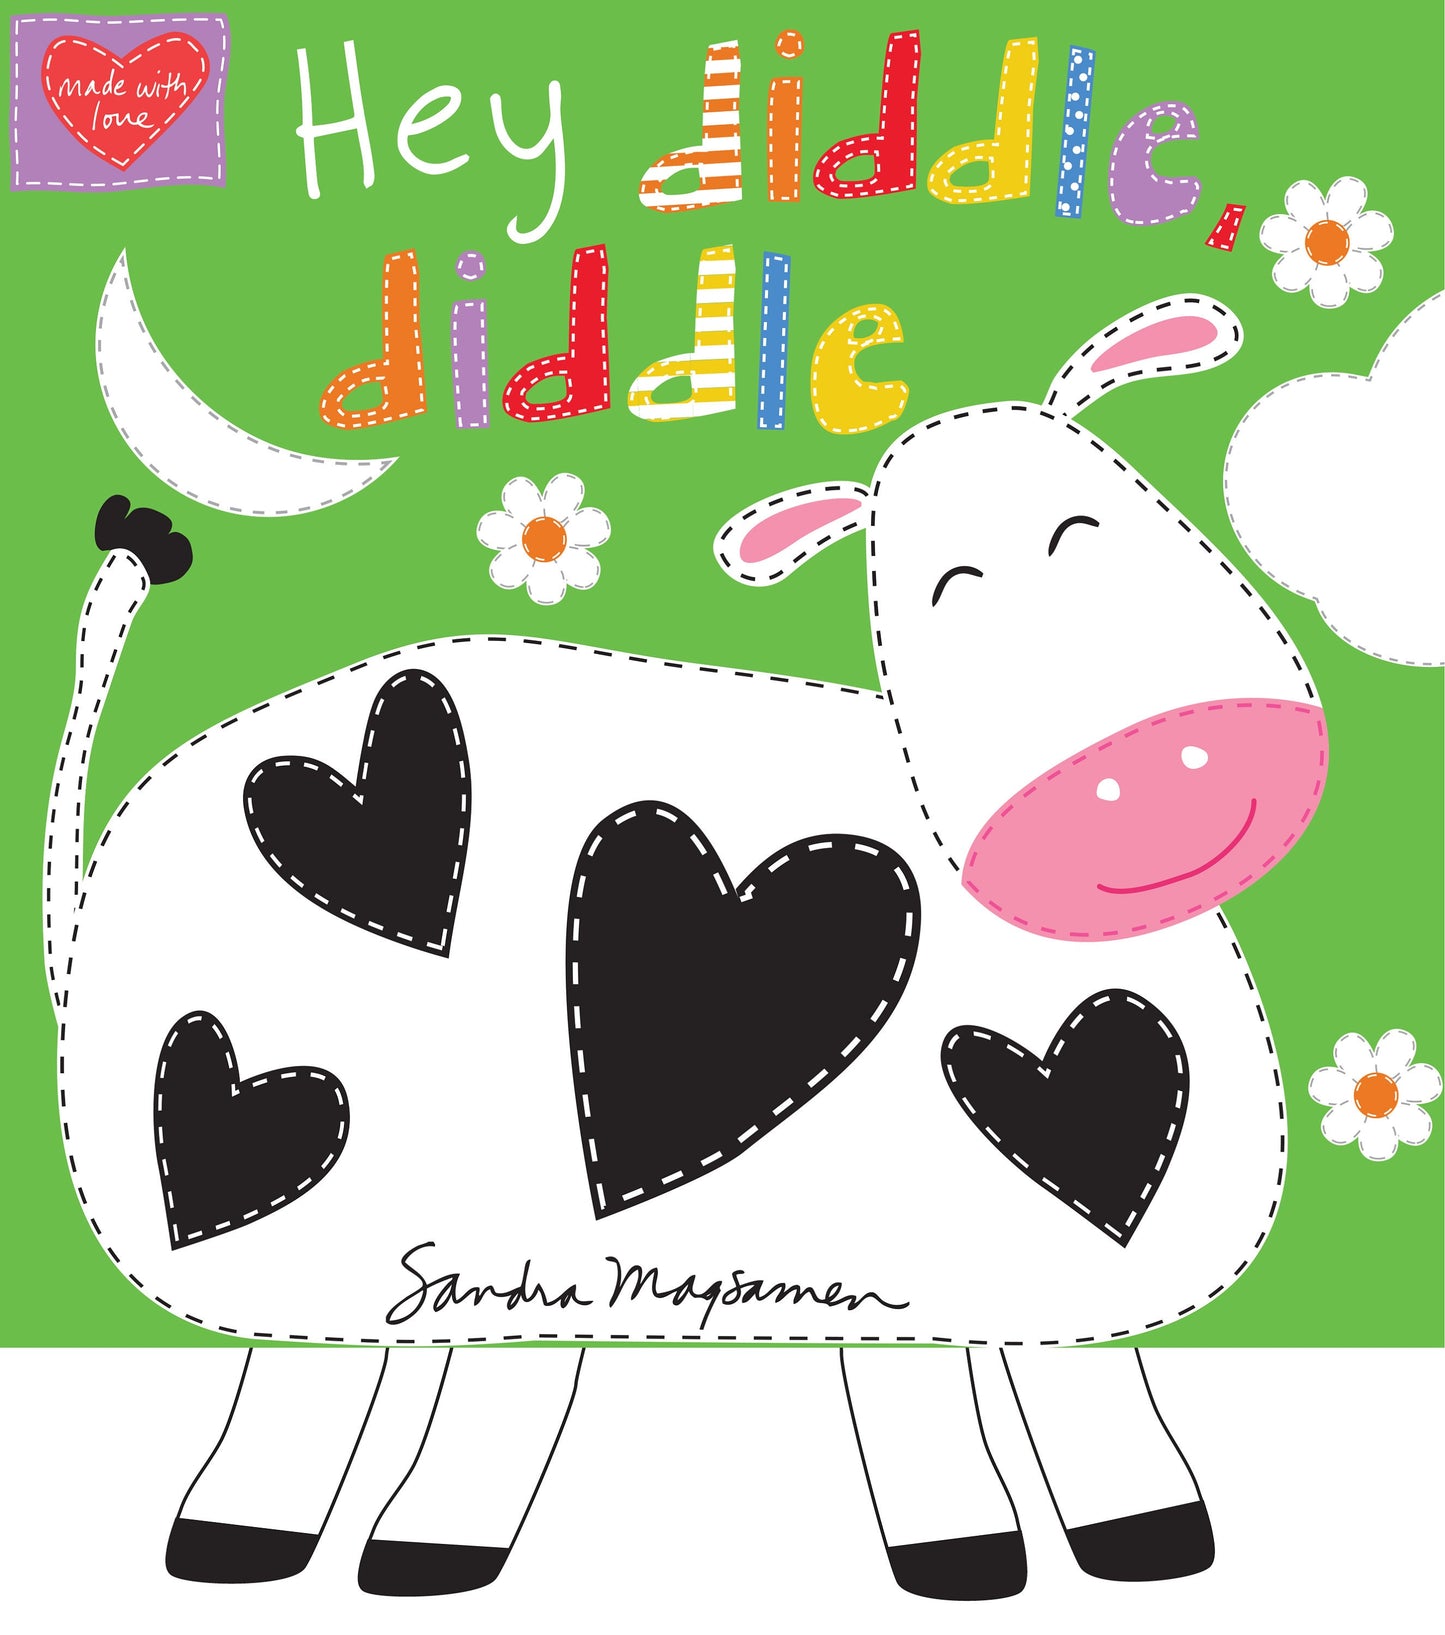 Huggable and Loveable Books VIII Hey Diddle Diddle 5057P-01 Cotton Woven Fabric